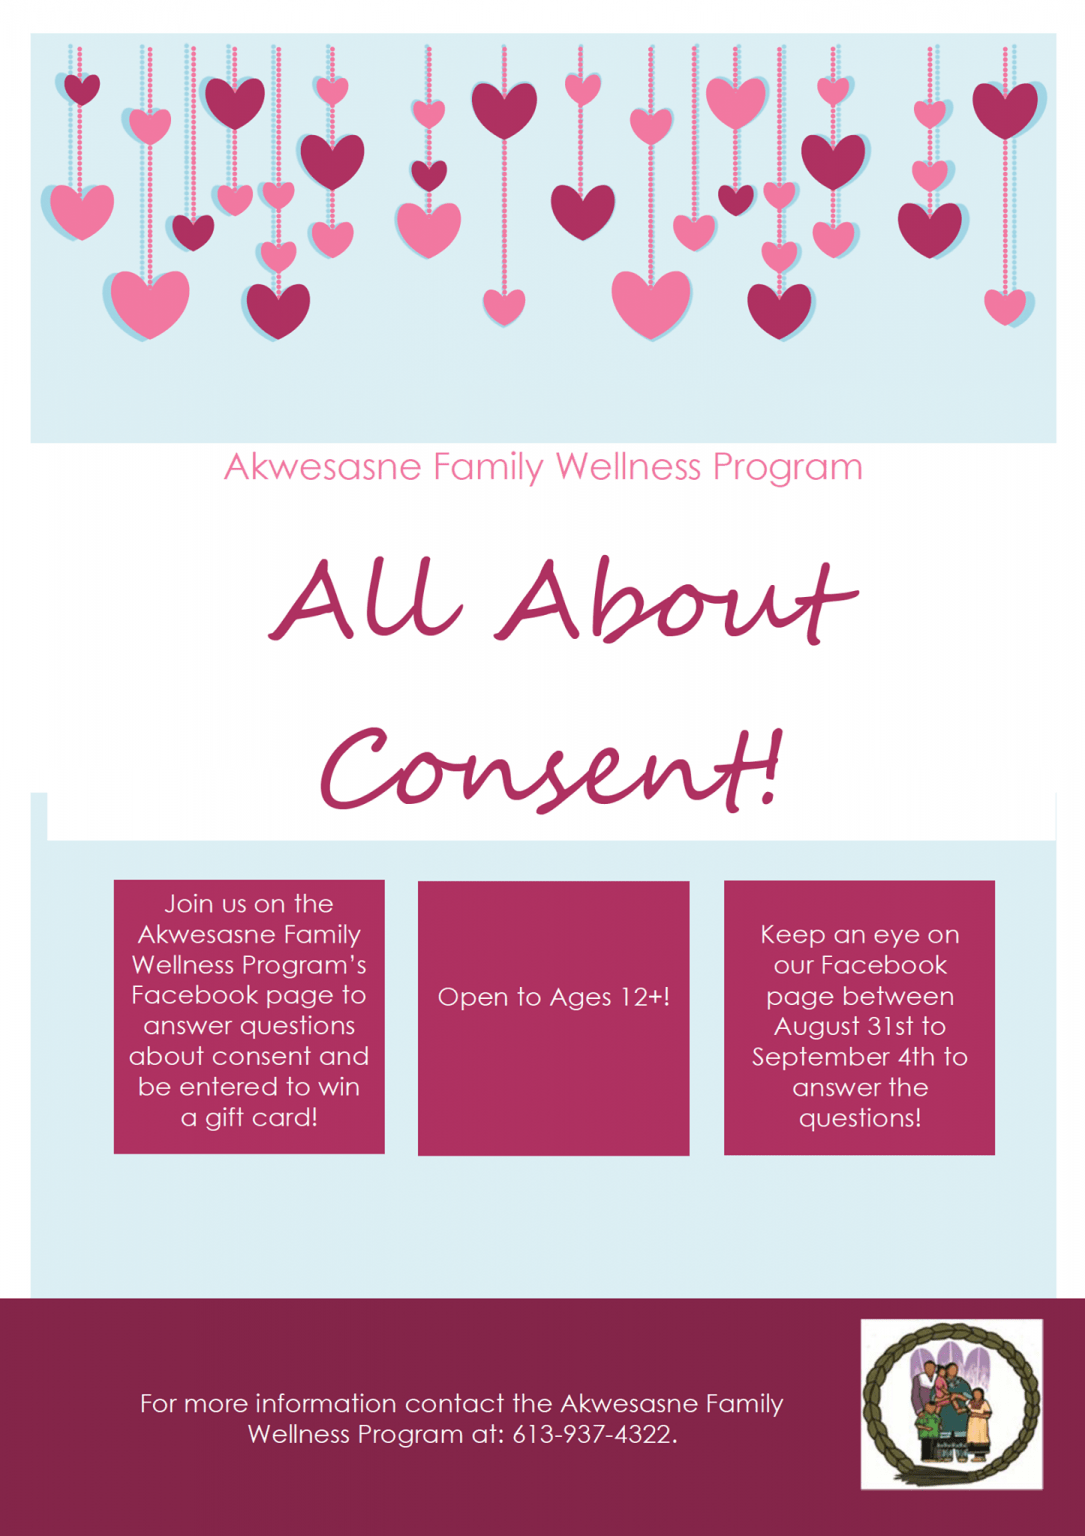 Afwp — All About Consent Mohawk Council Of Akwesasne 1183